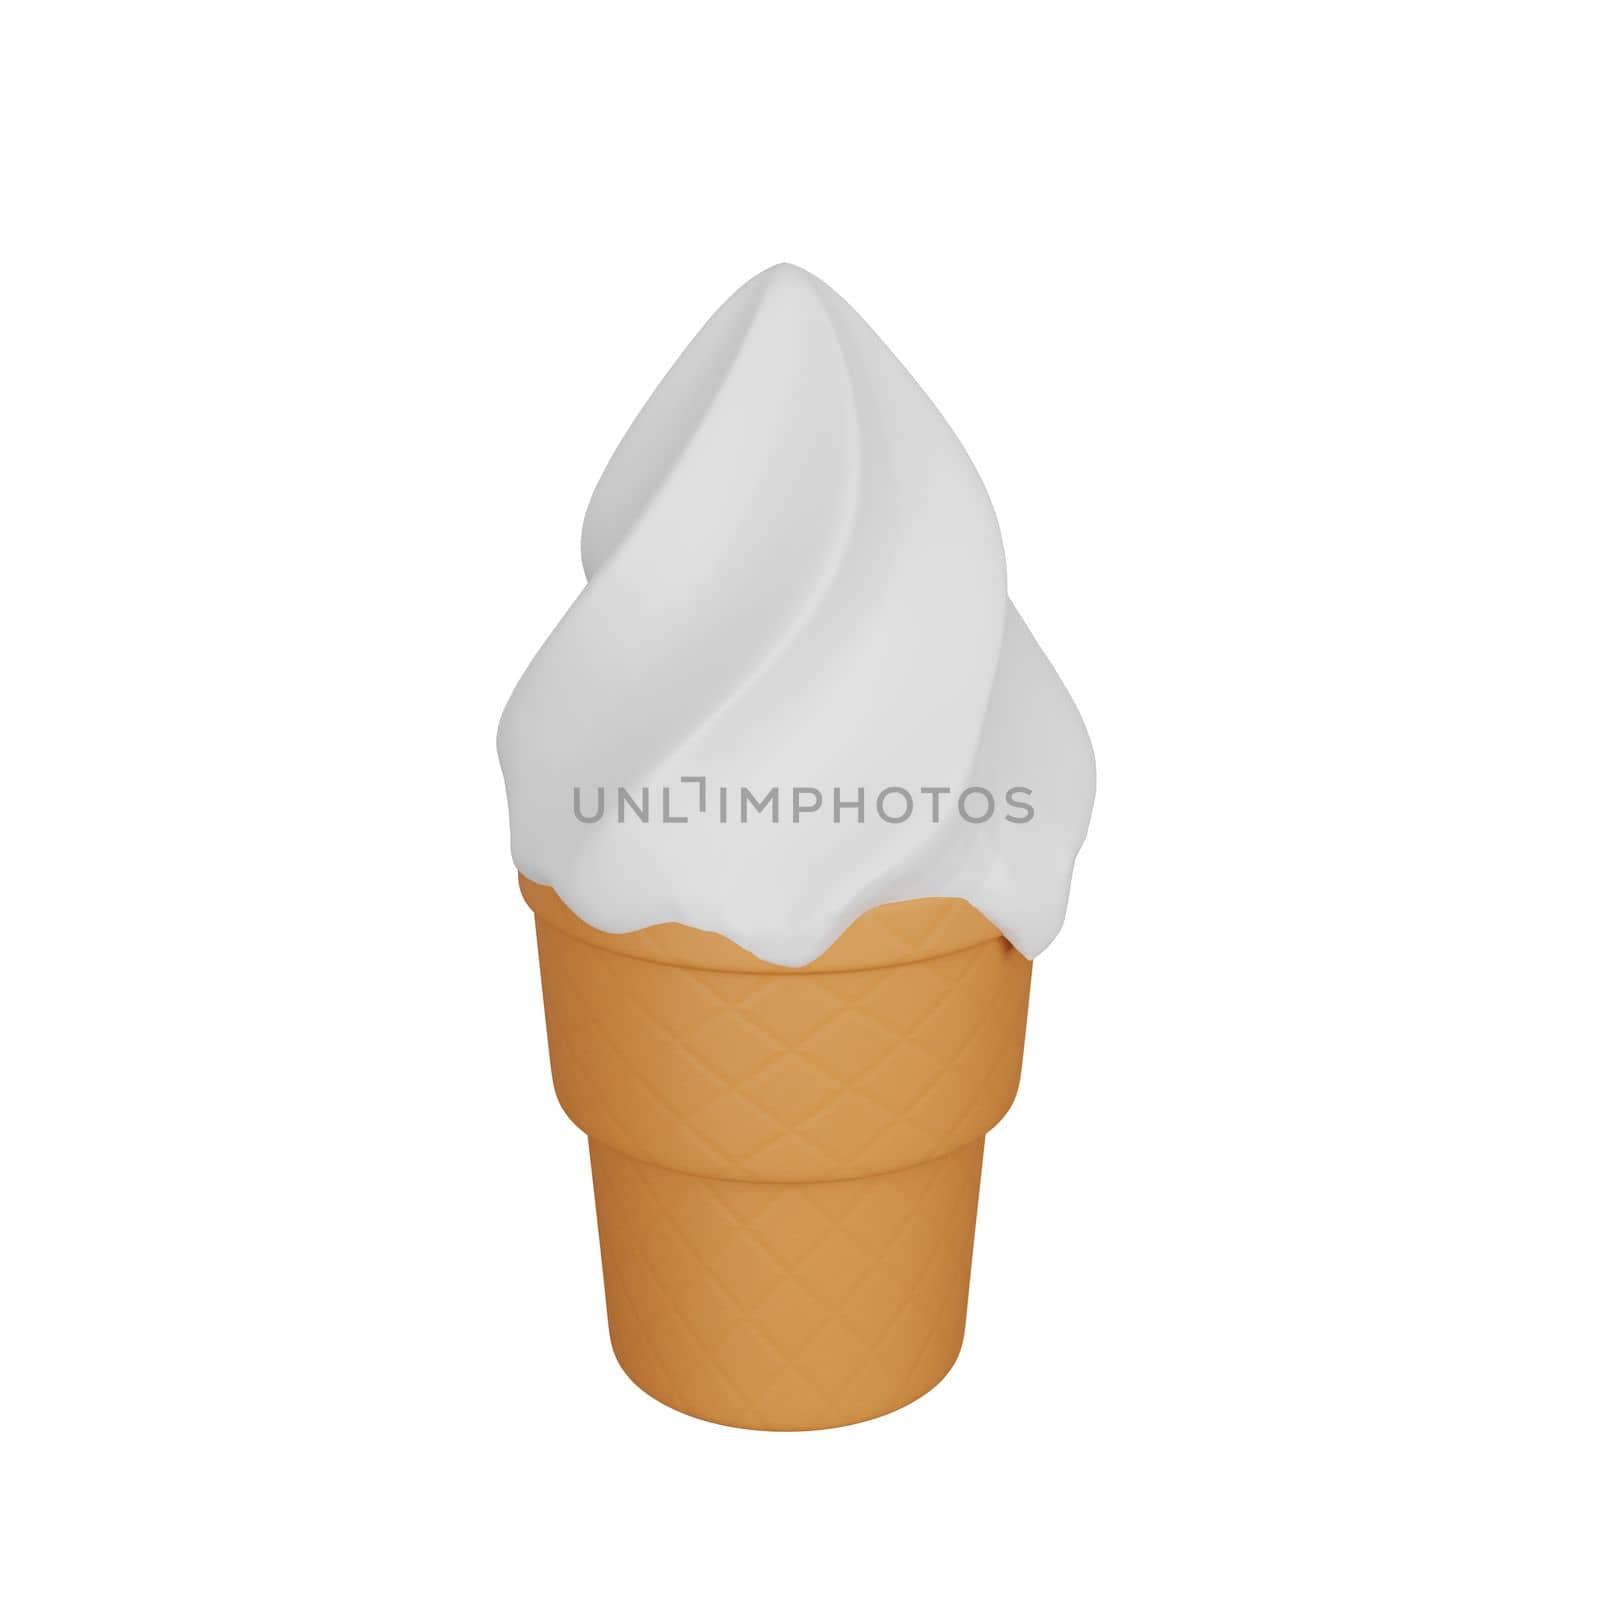 3d rendering of ice cream fast food icon